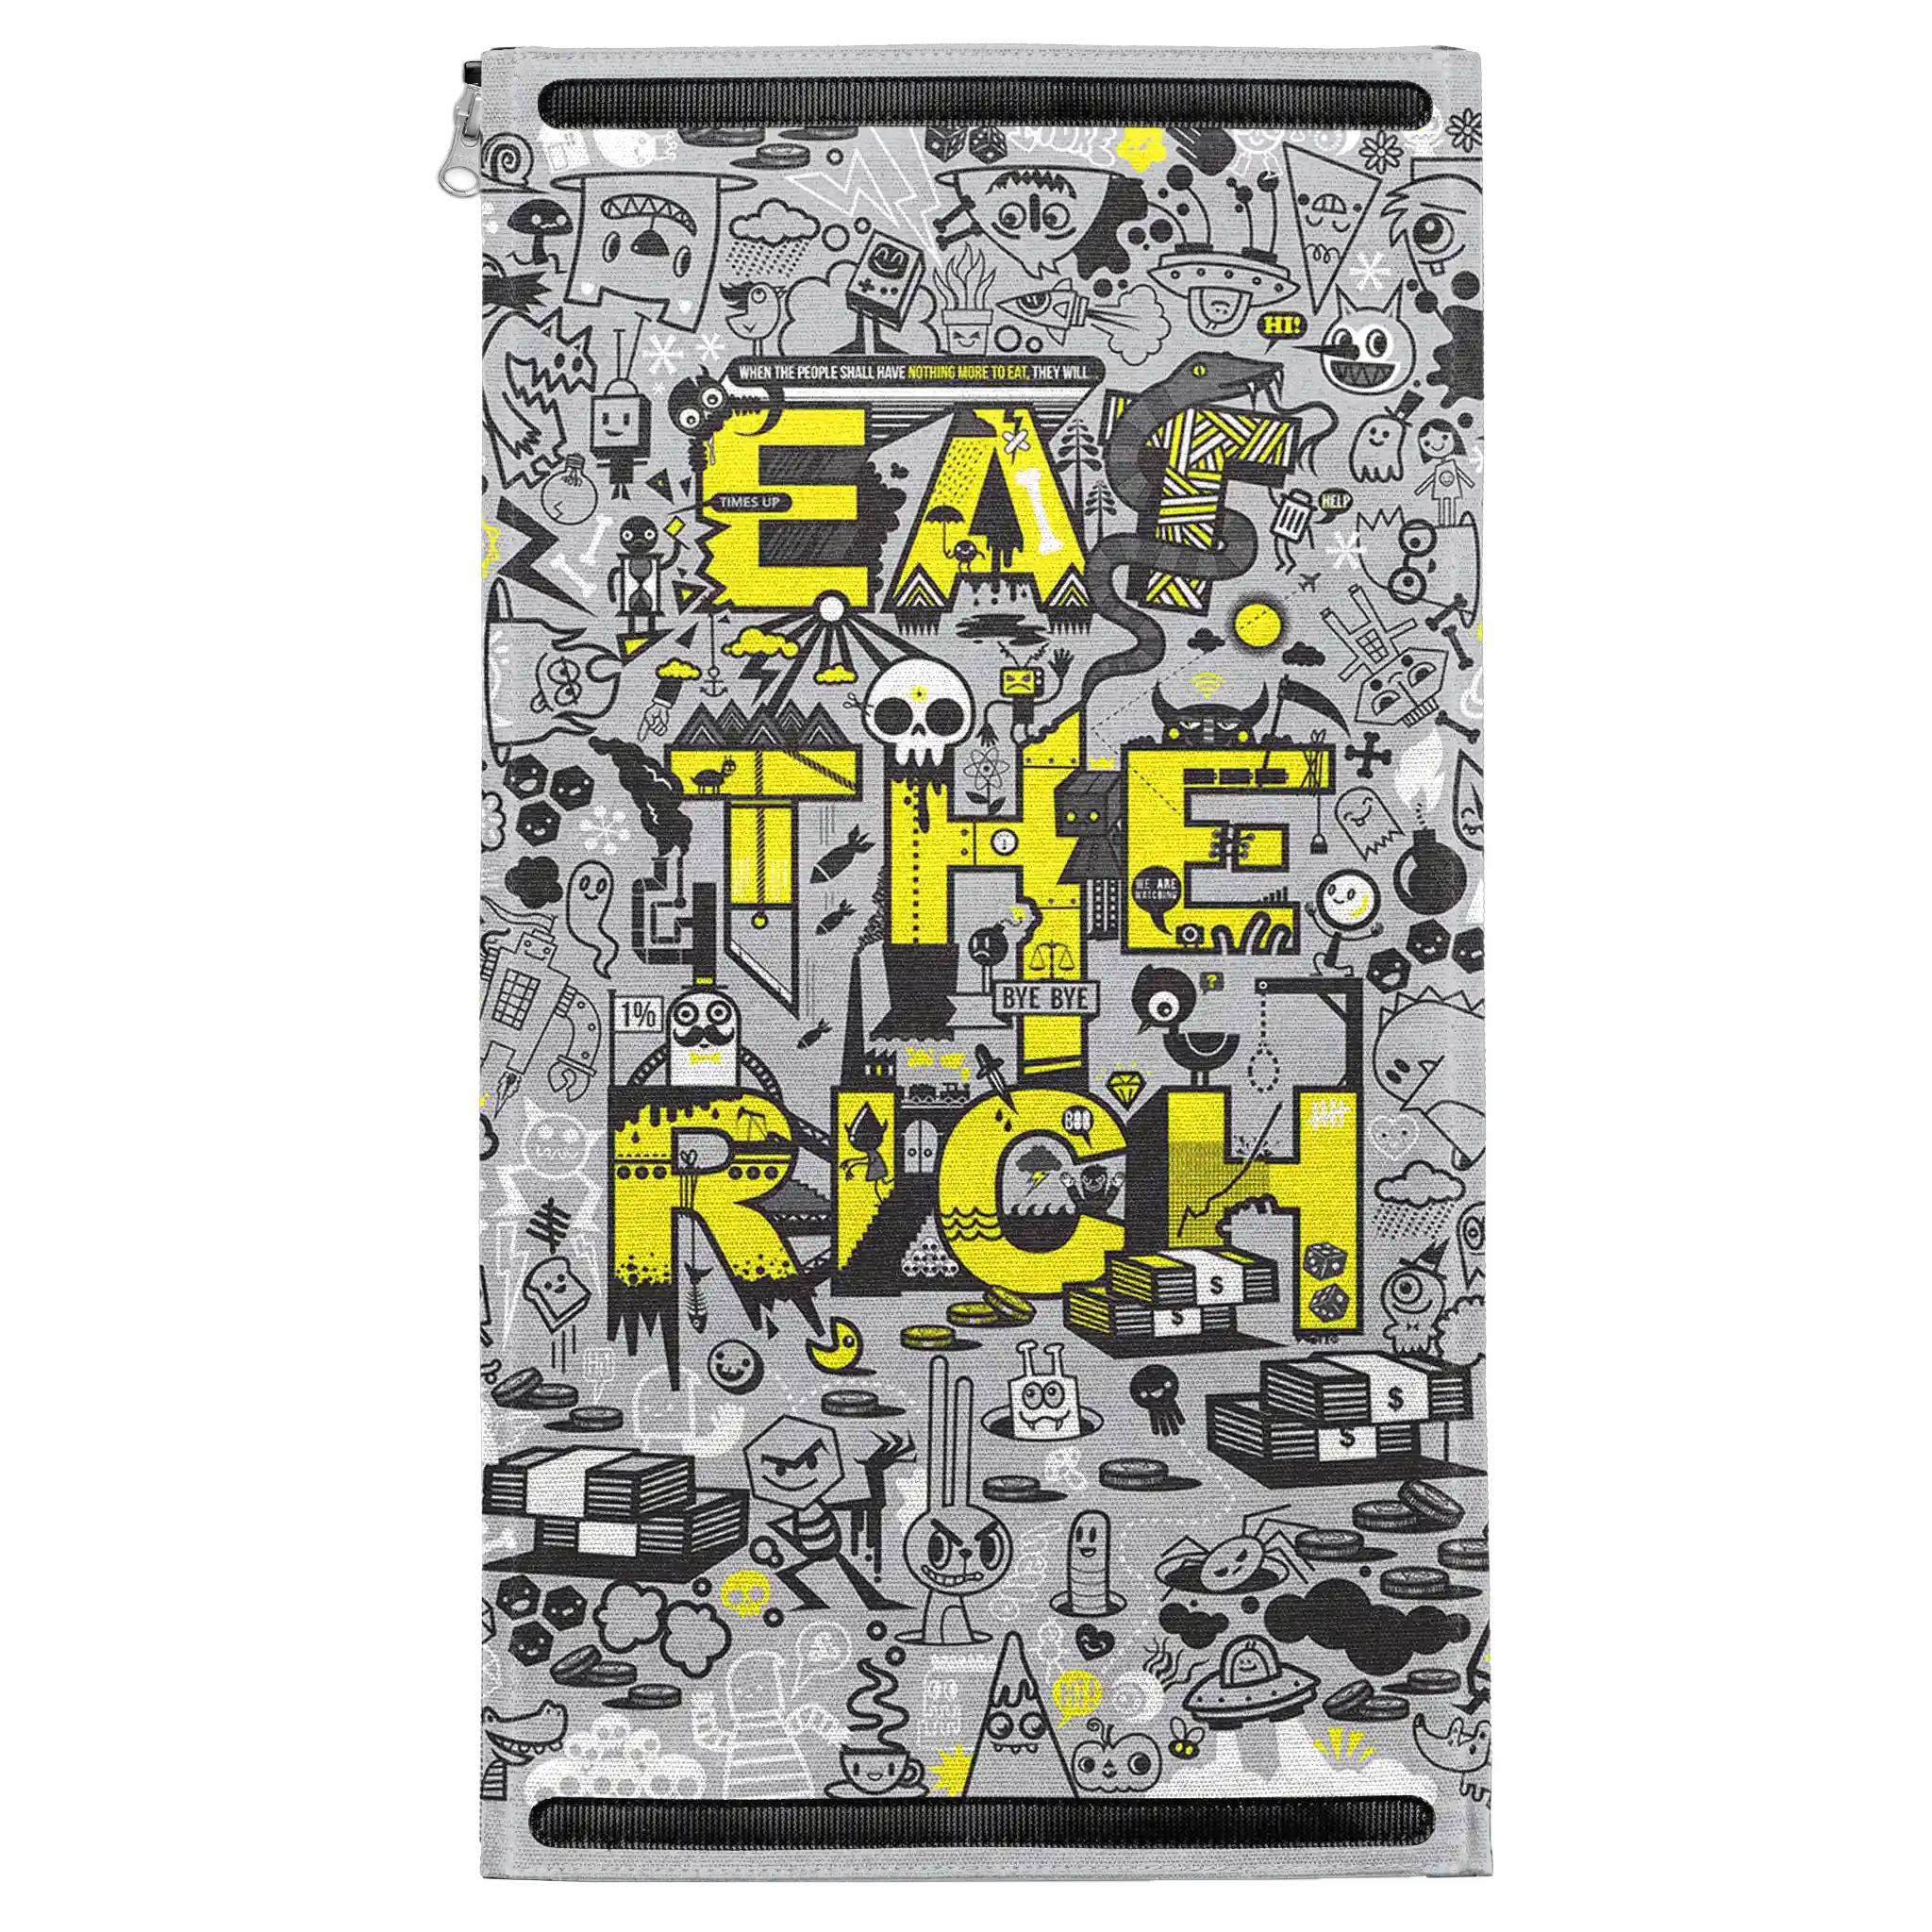 Eat The Rich Patch